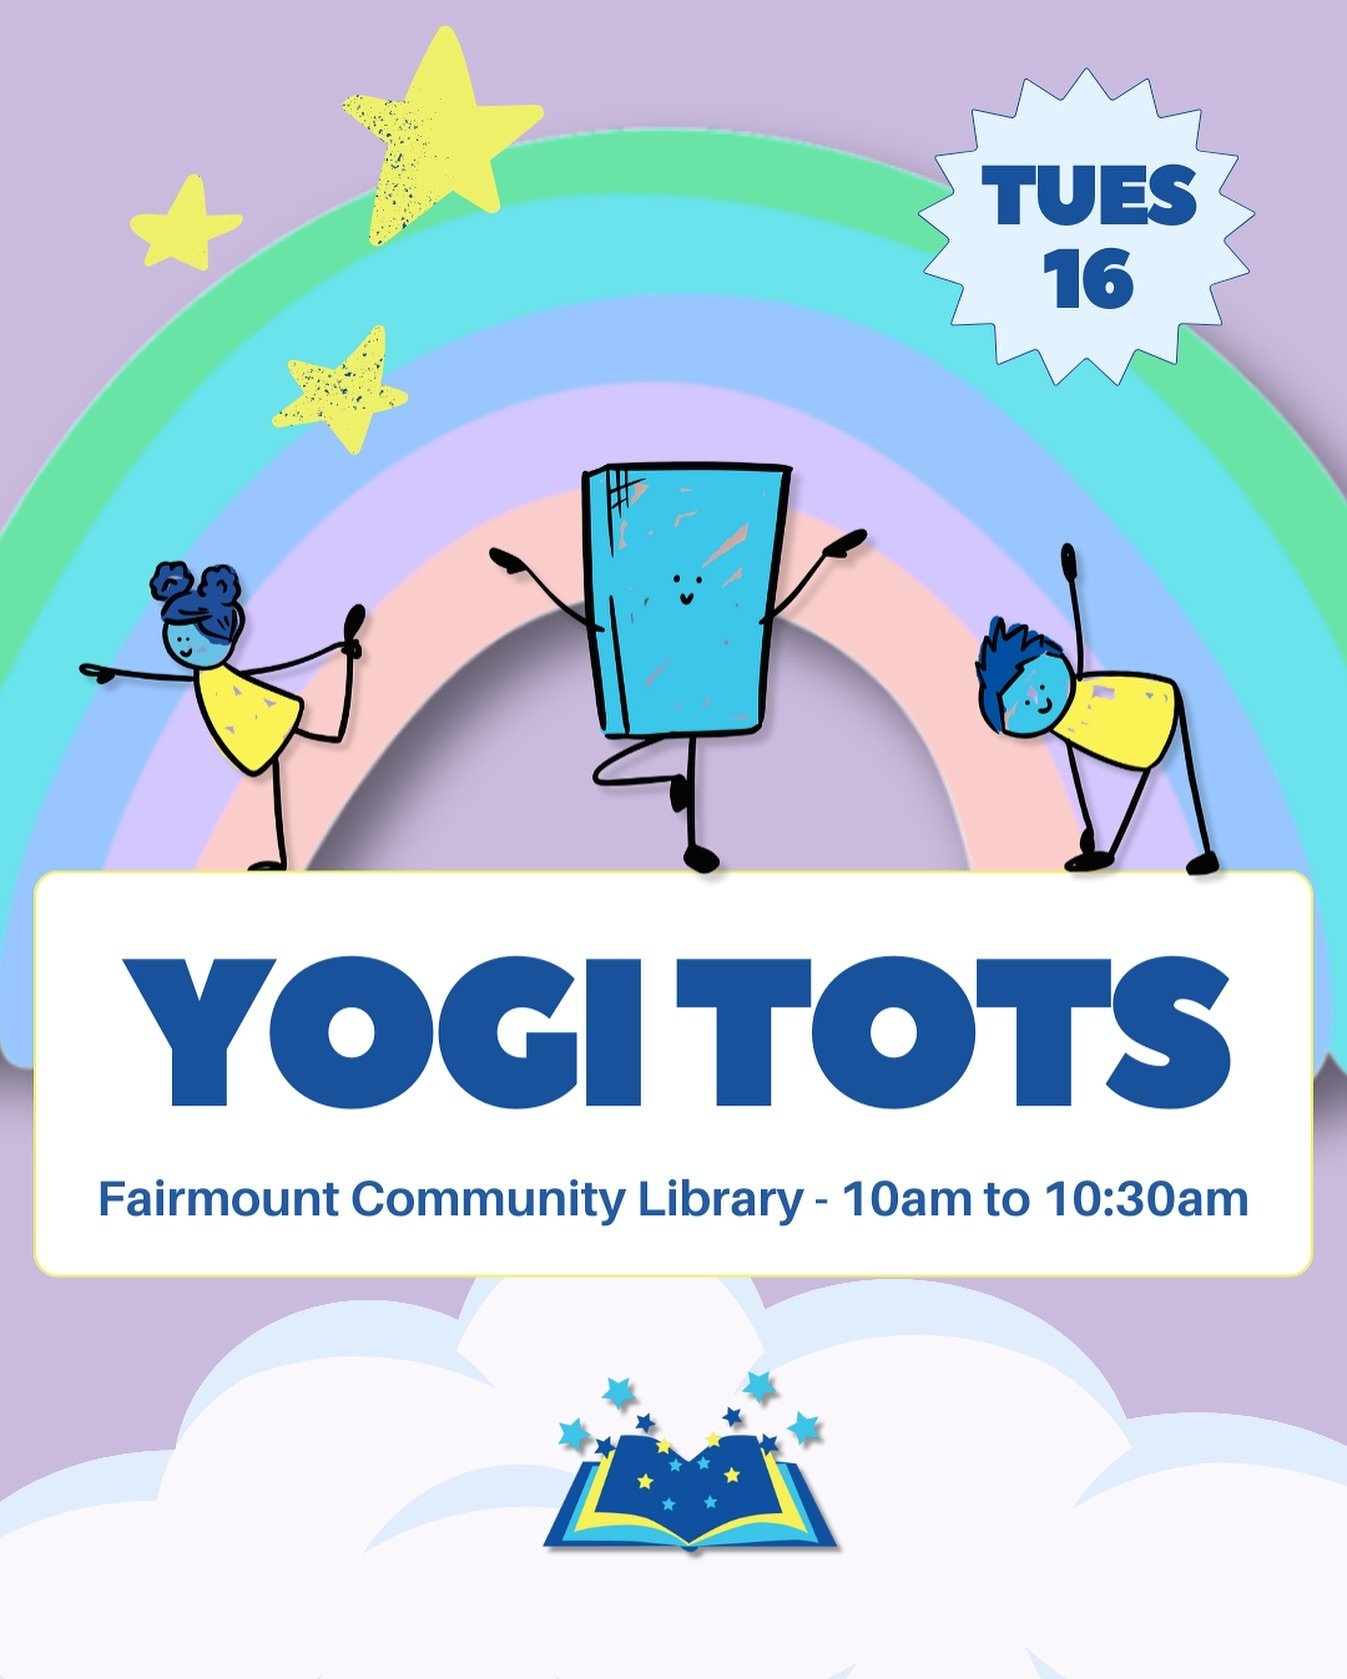 ✌️THIS WEEK!! Come join us! 🤓

🪺 Yogi Tots:
Tue. 4/9 @ 10am-10:30am - Fairmount Community Library

And as always, 🐢 Member Mondays Kids TODAY!!
4:30pm-5:15pm - Fairmount Park

🔗 Visit our EVENTS page on Facebook or screenshot 📲 and click the lin